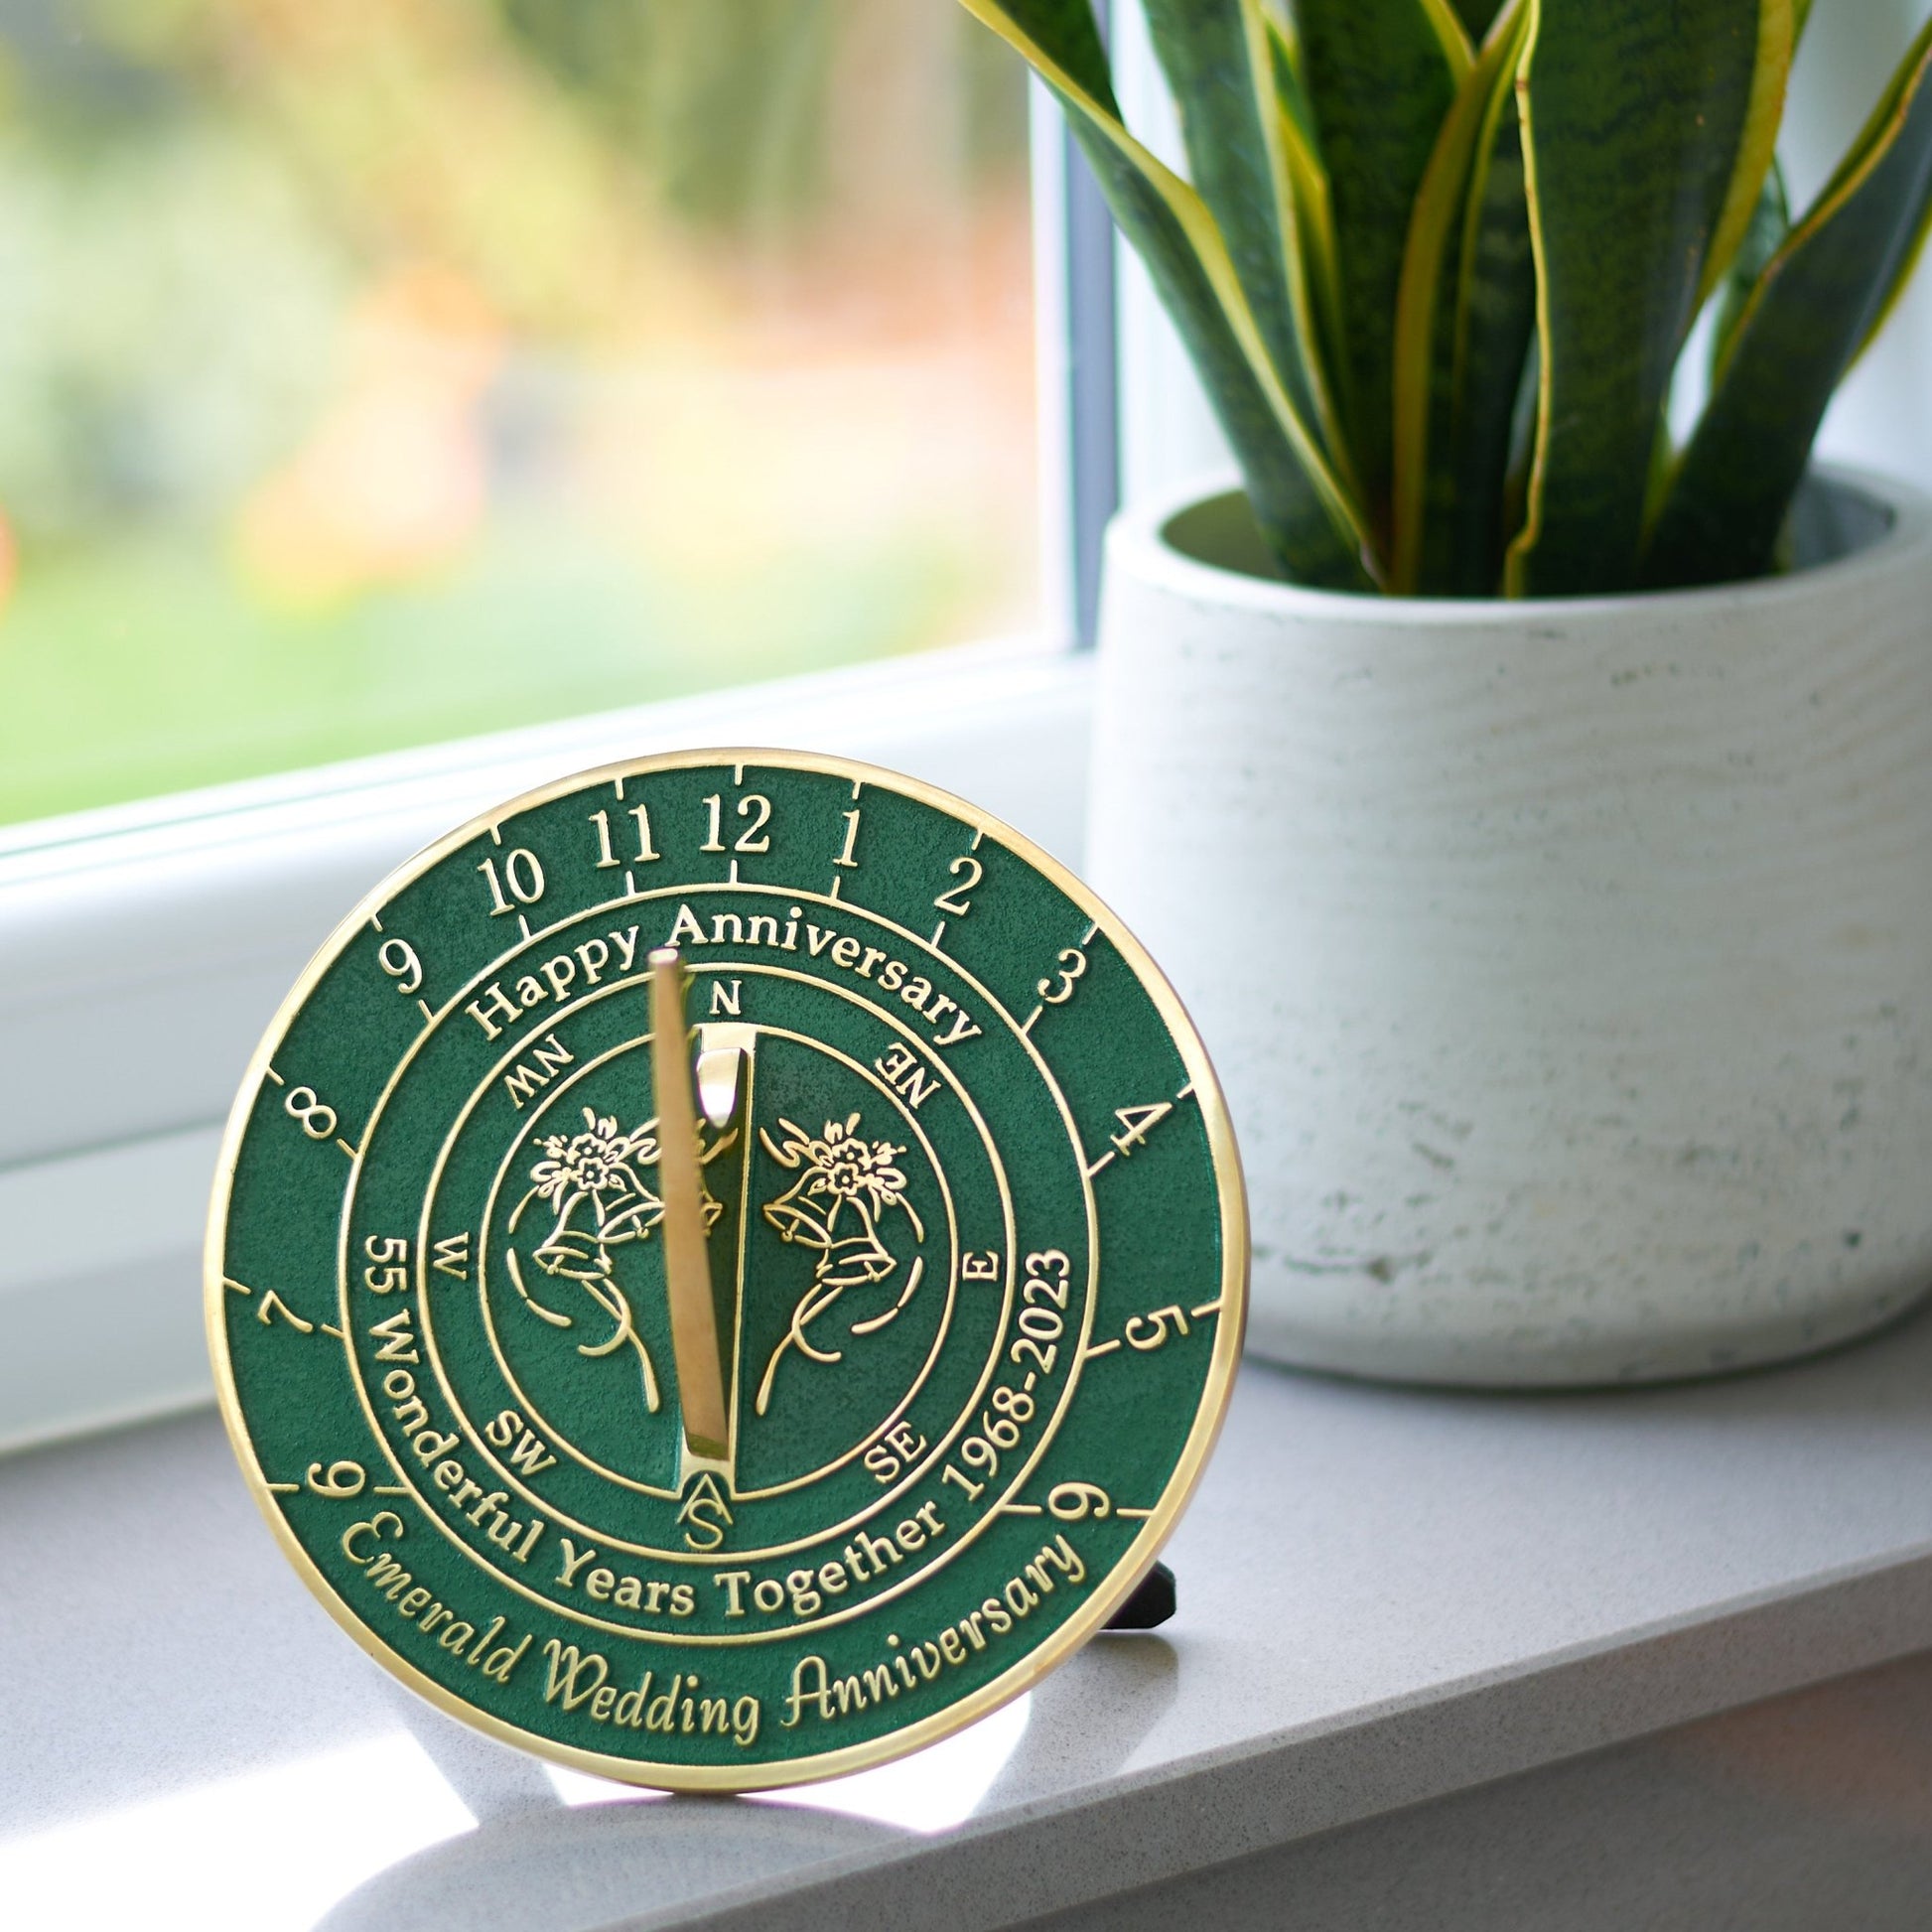 Emerald 55th Anniversary Sundial® 2023 Edition - The Metal Foundry